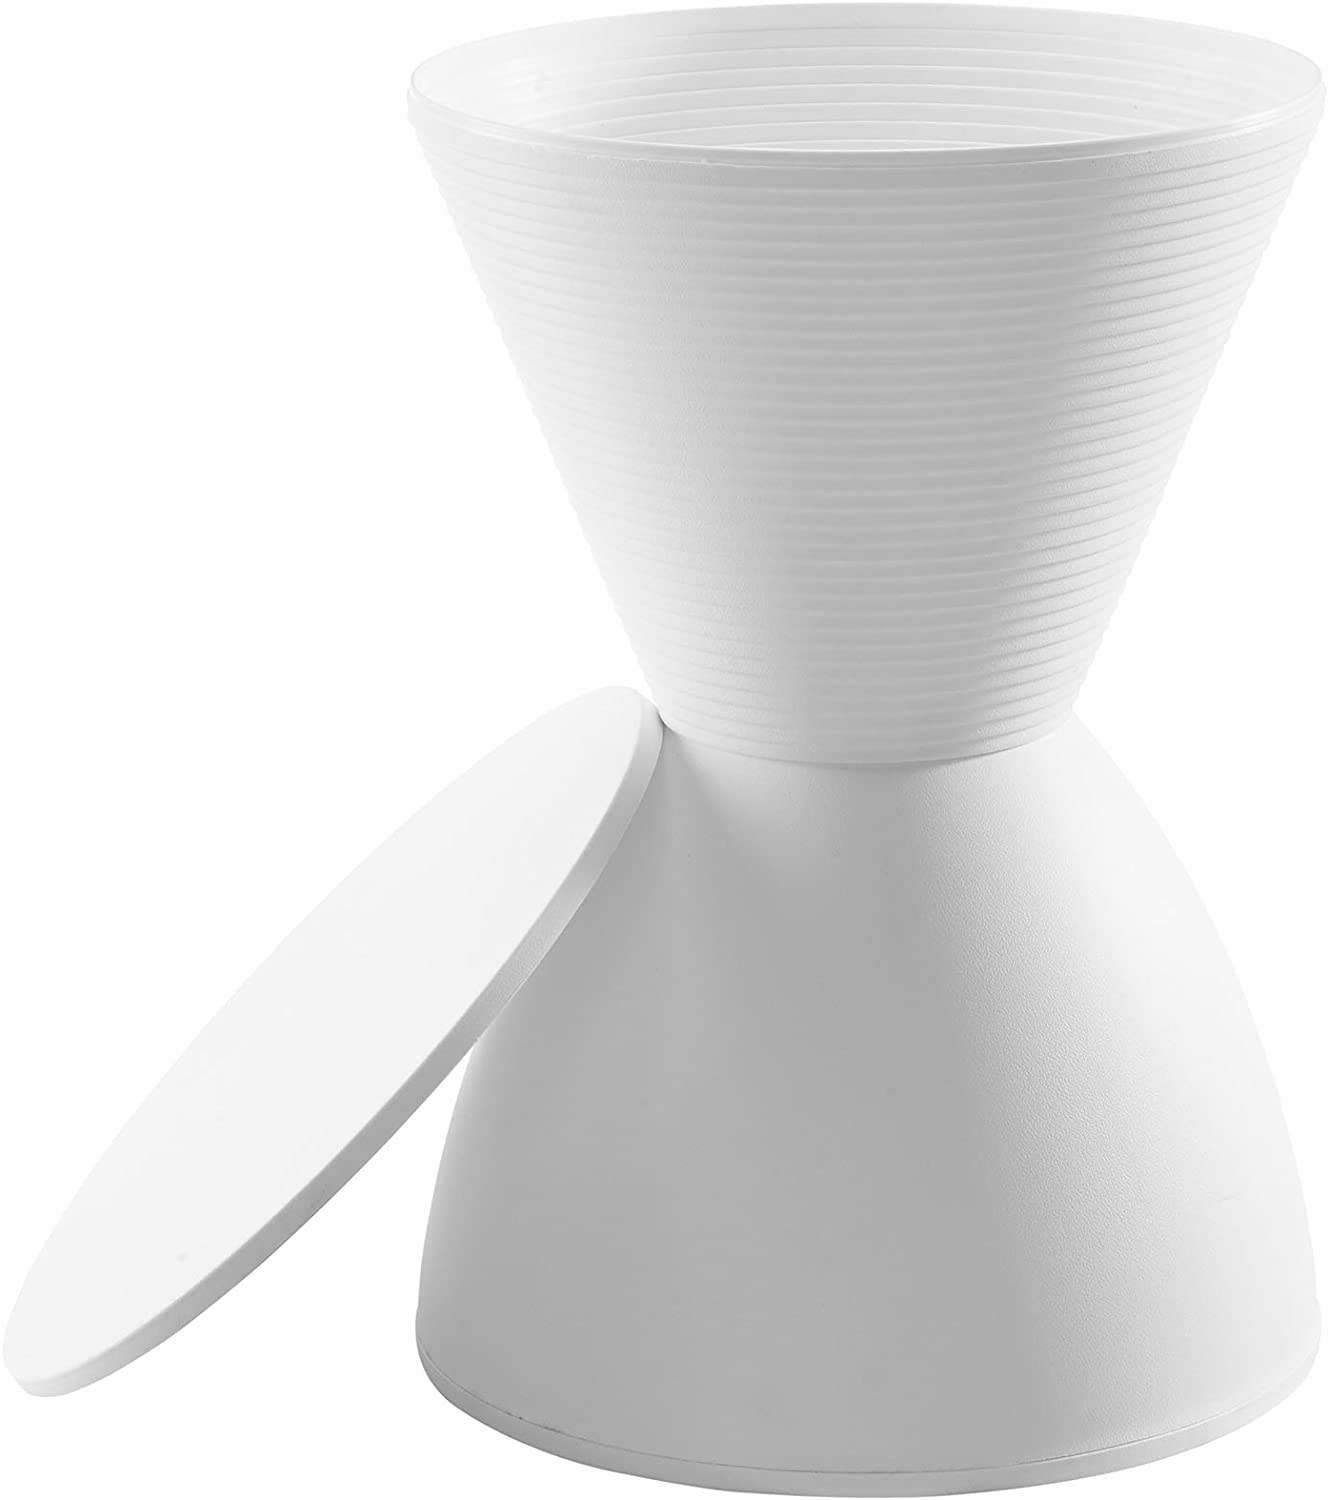 Modway Haste Contemporary Modern Hourglass Accent Stool in White